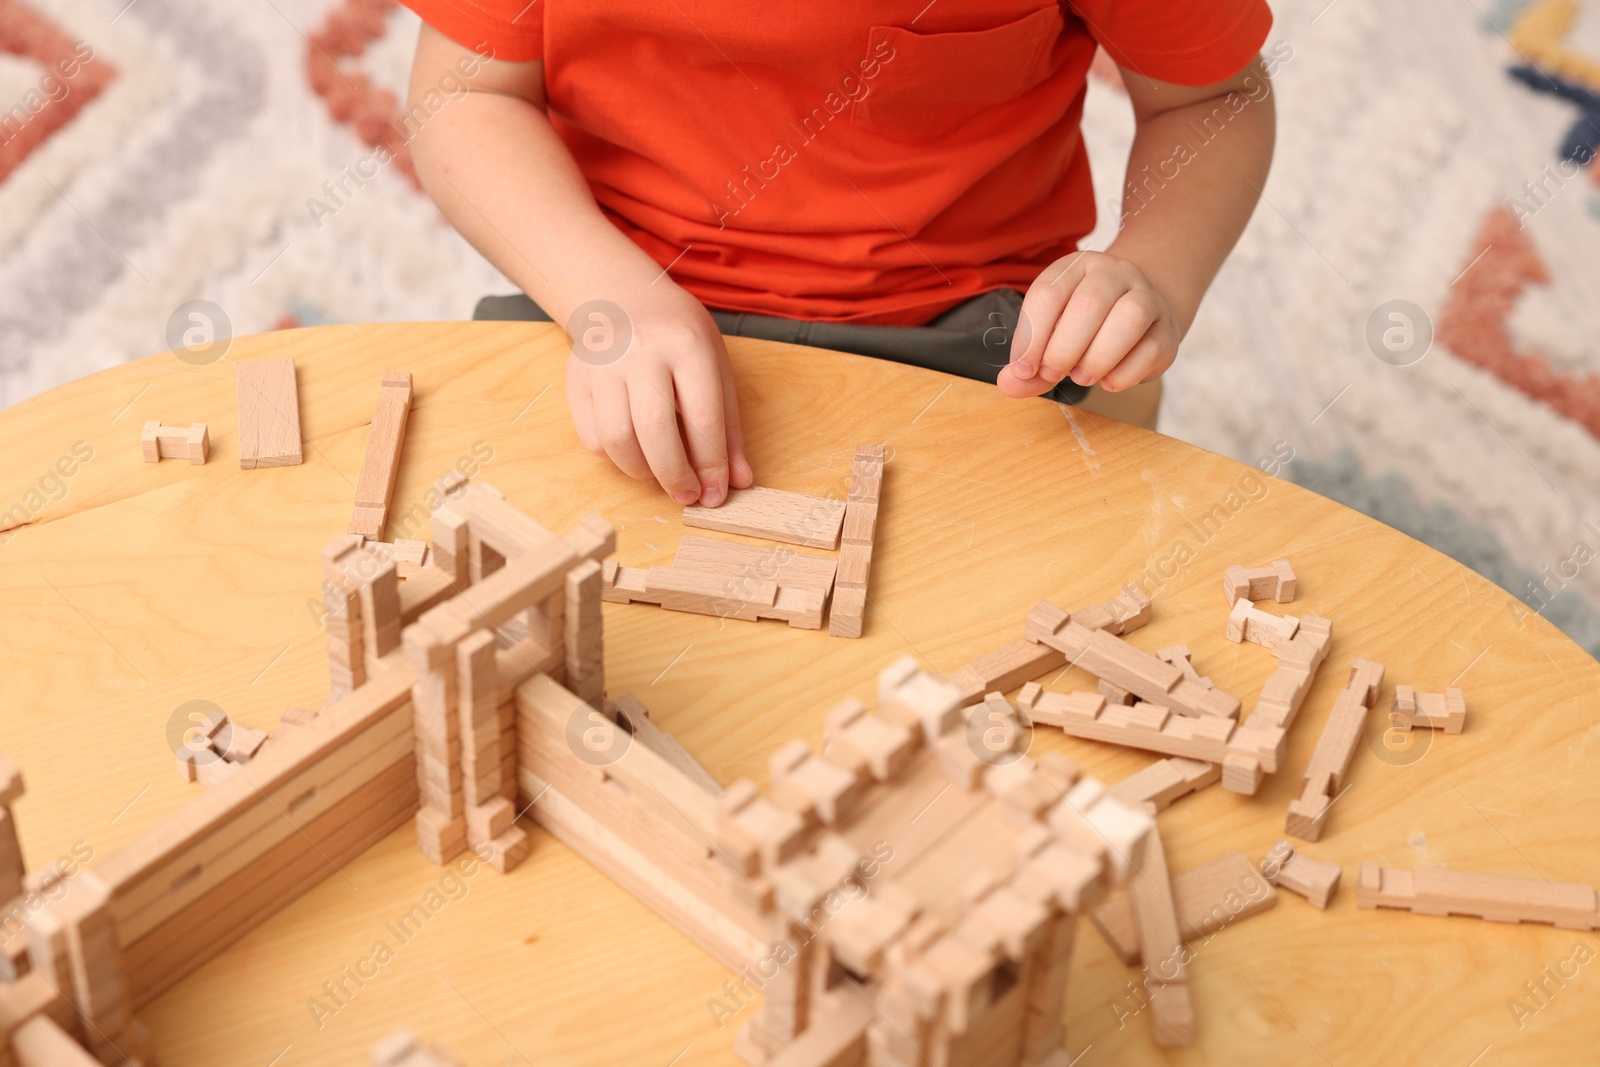 Photo of Little boy playing with wooden construction set at table in room, closeup. Child's toy